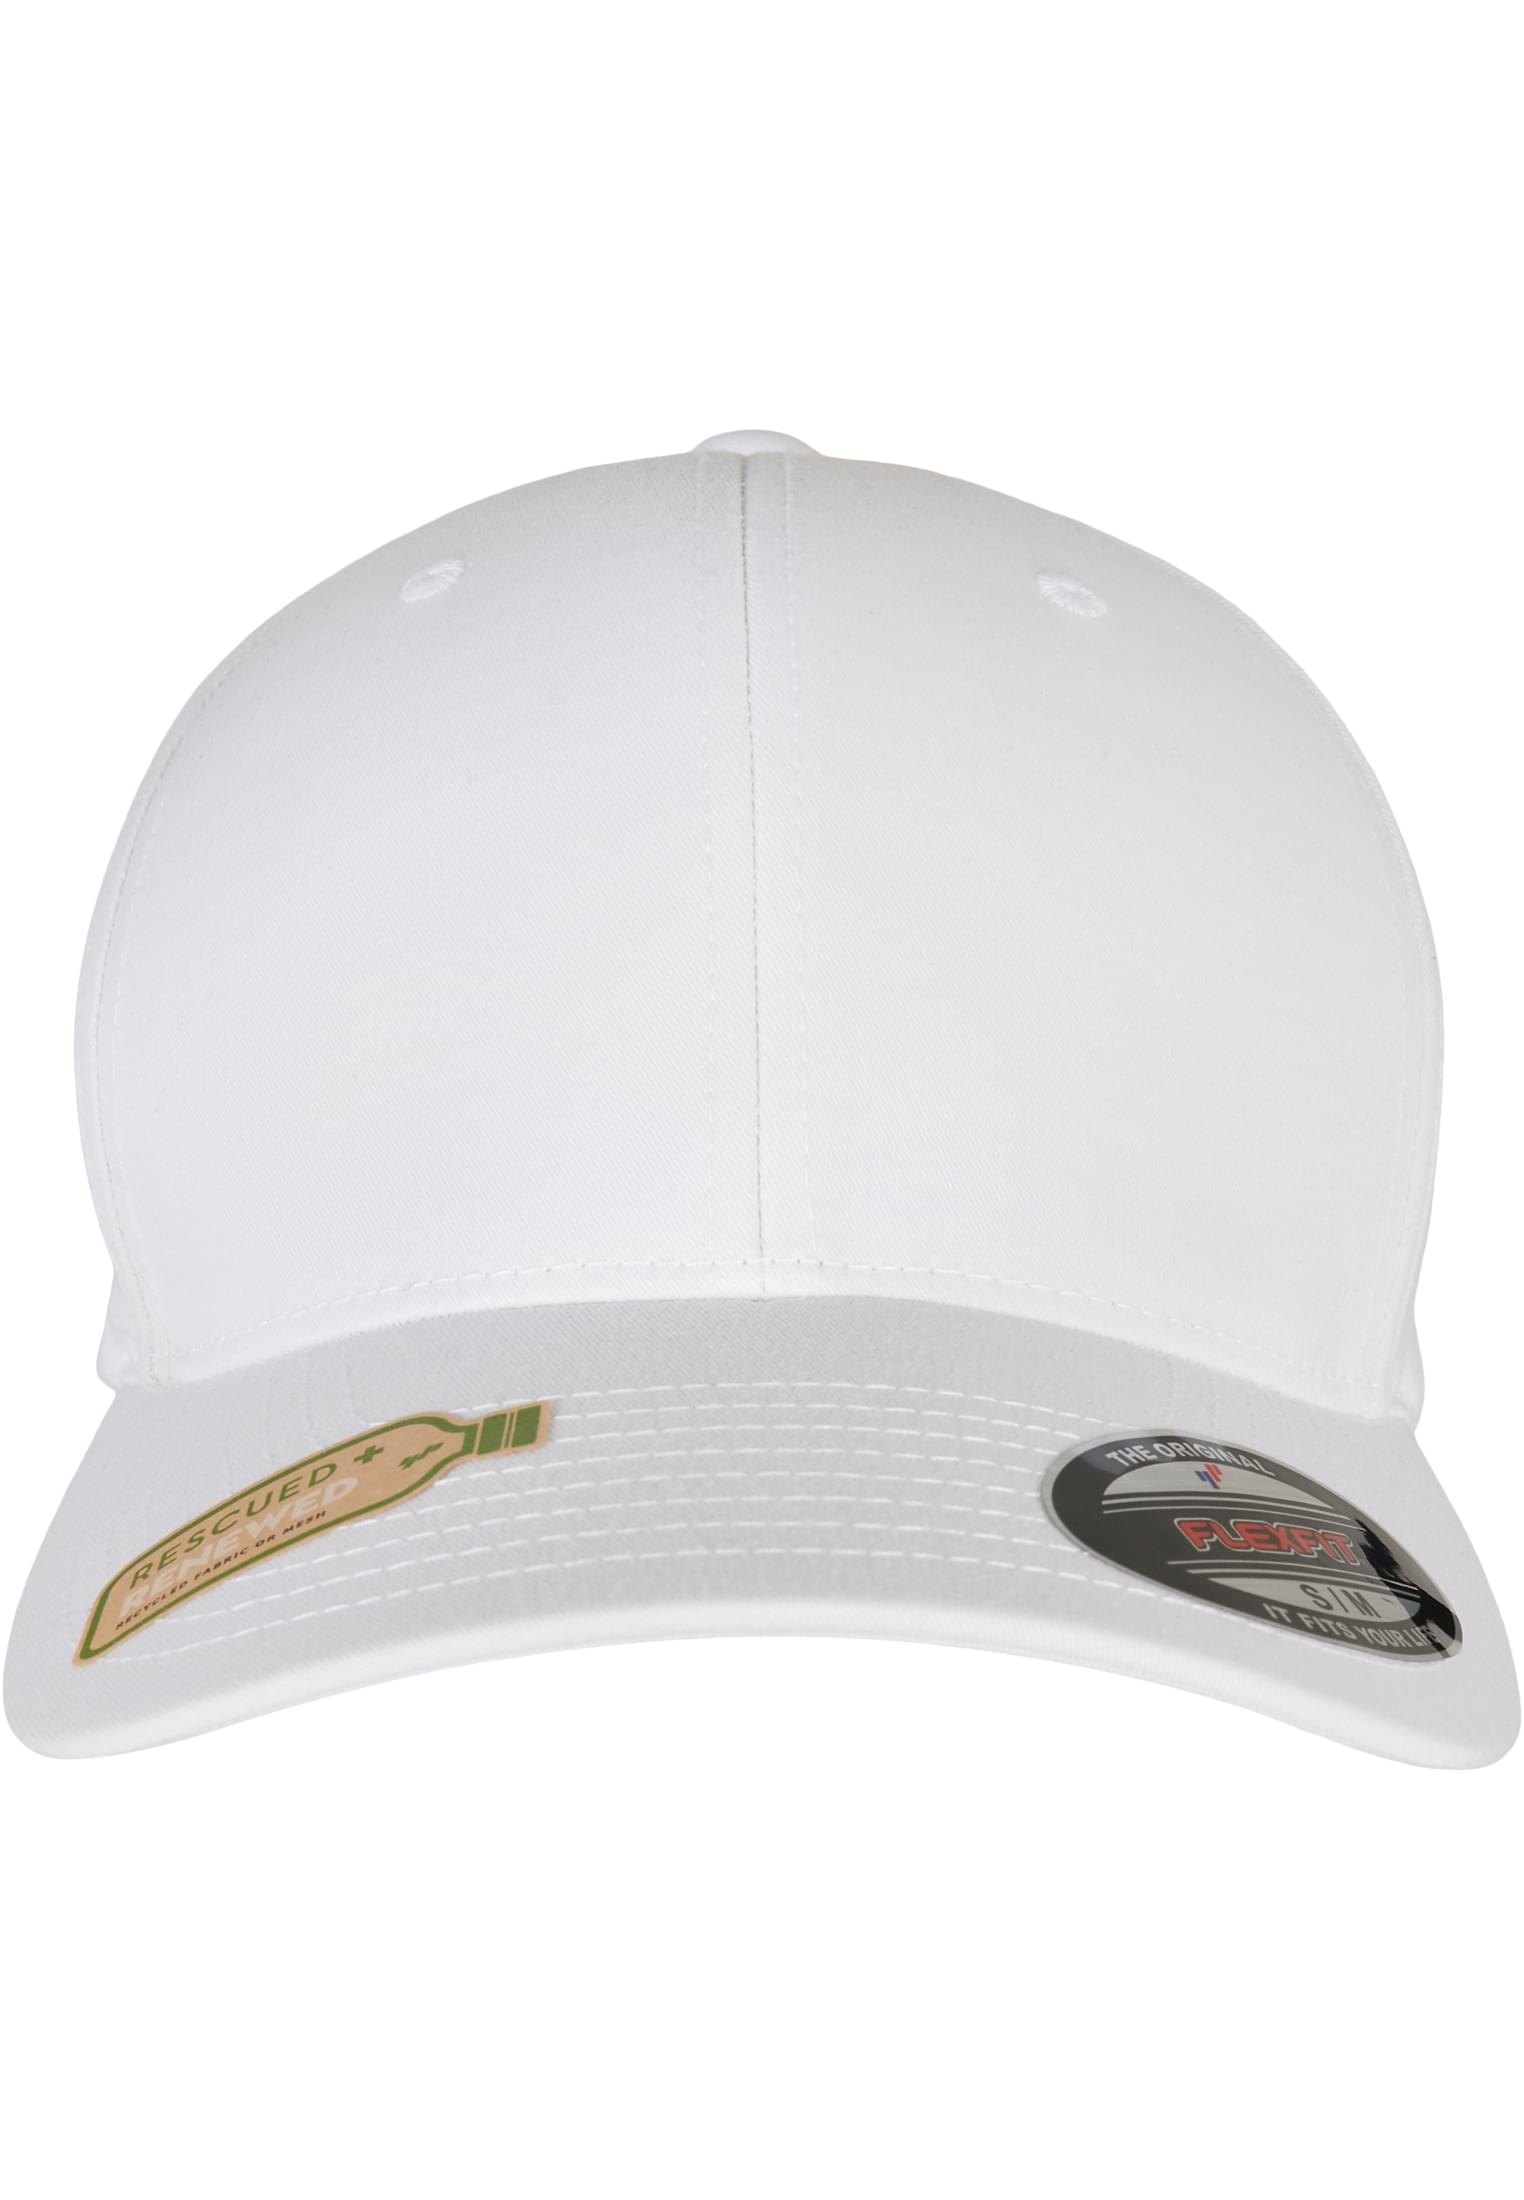 Polyester Recycled Cap-6277RP Flexfit